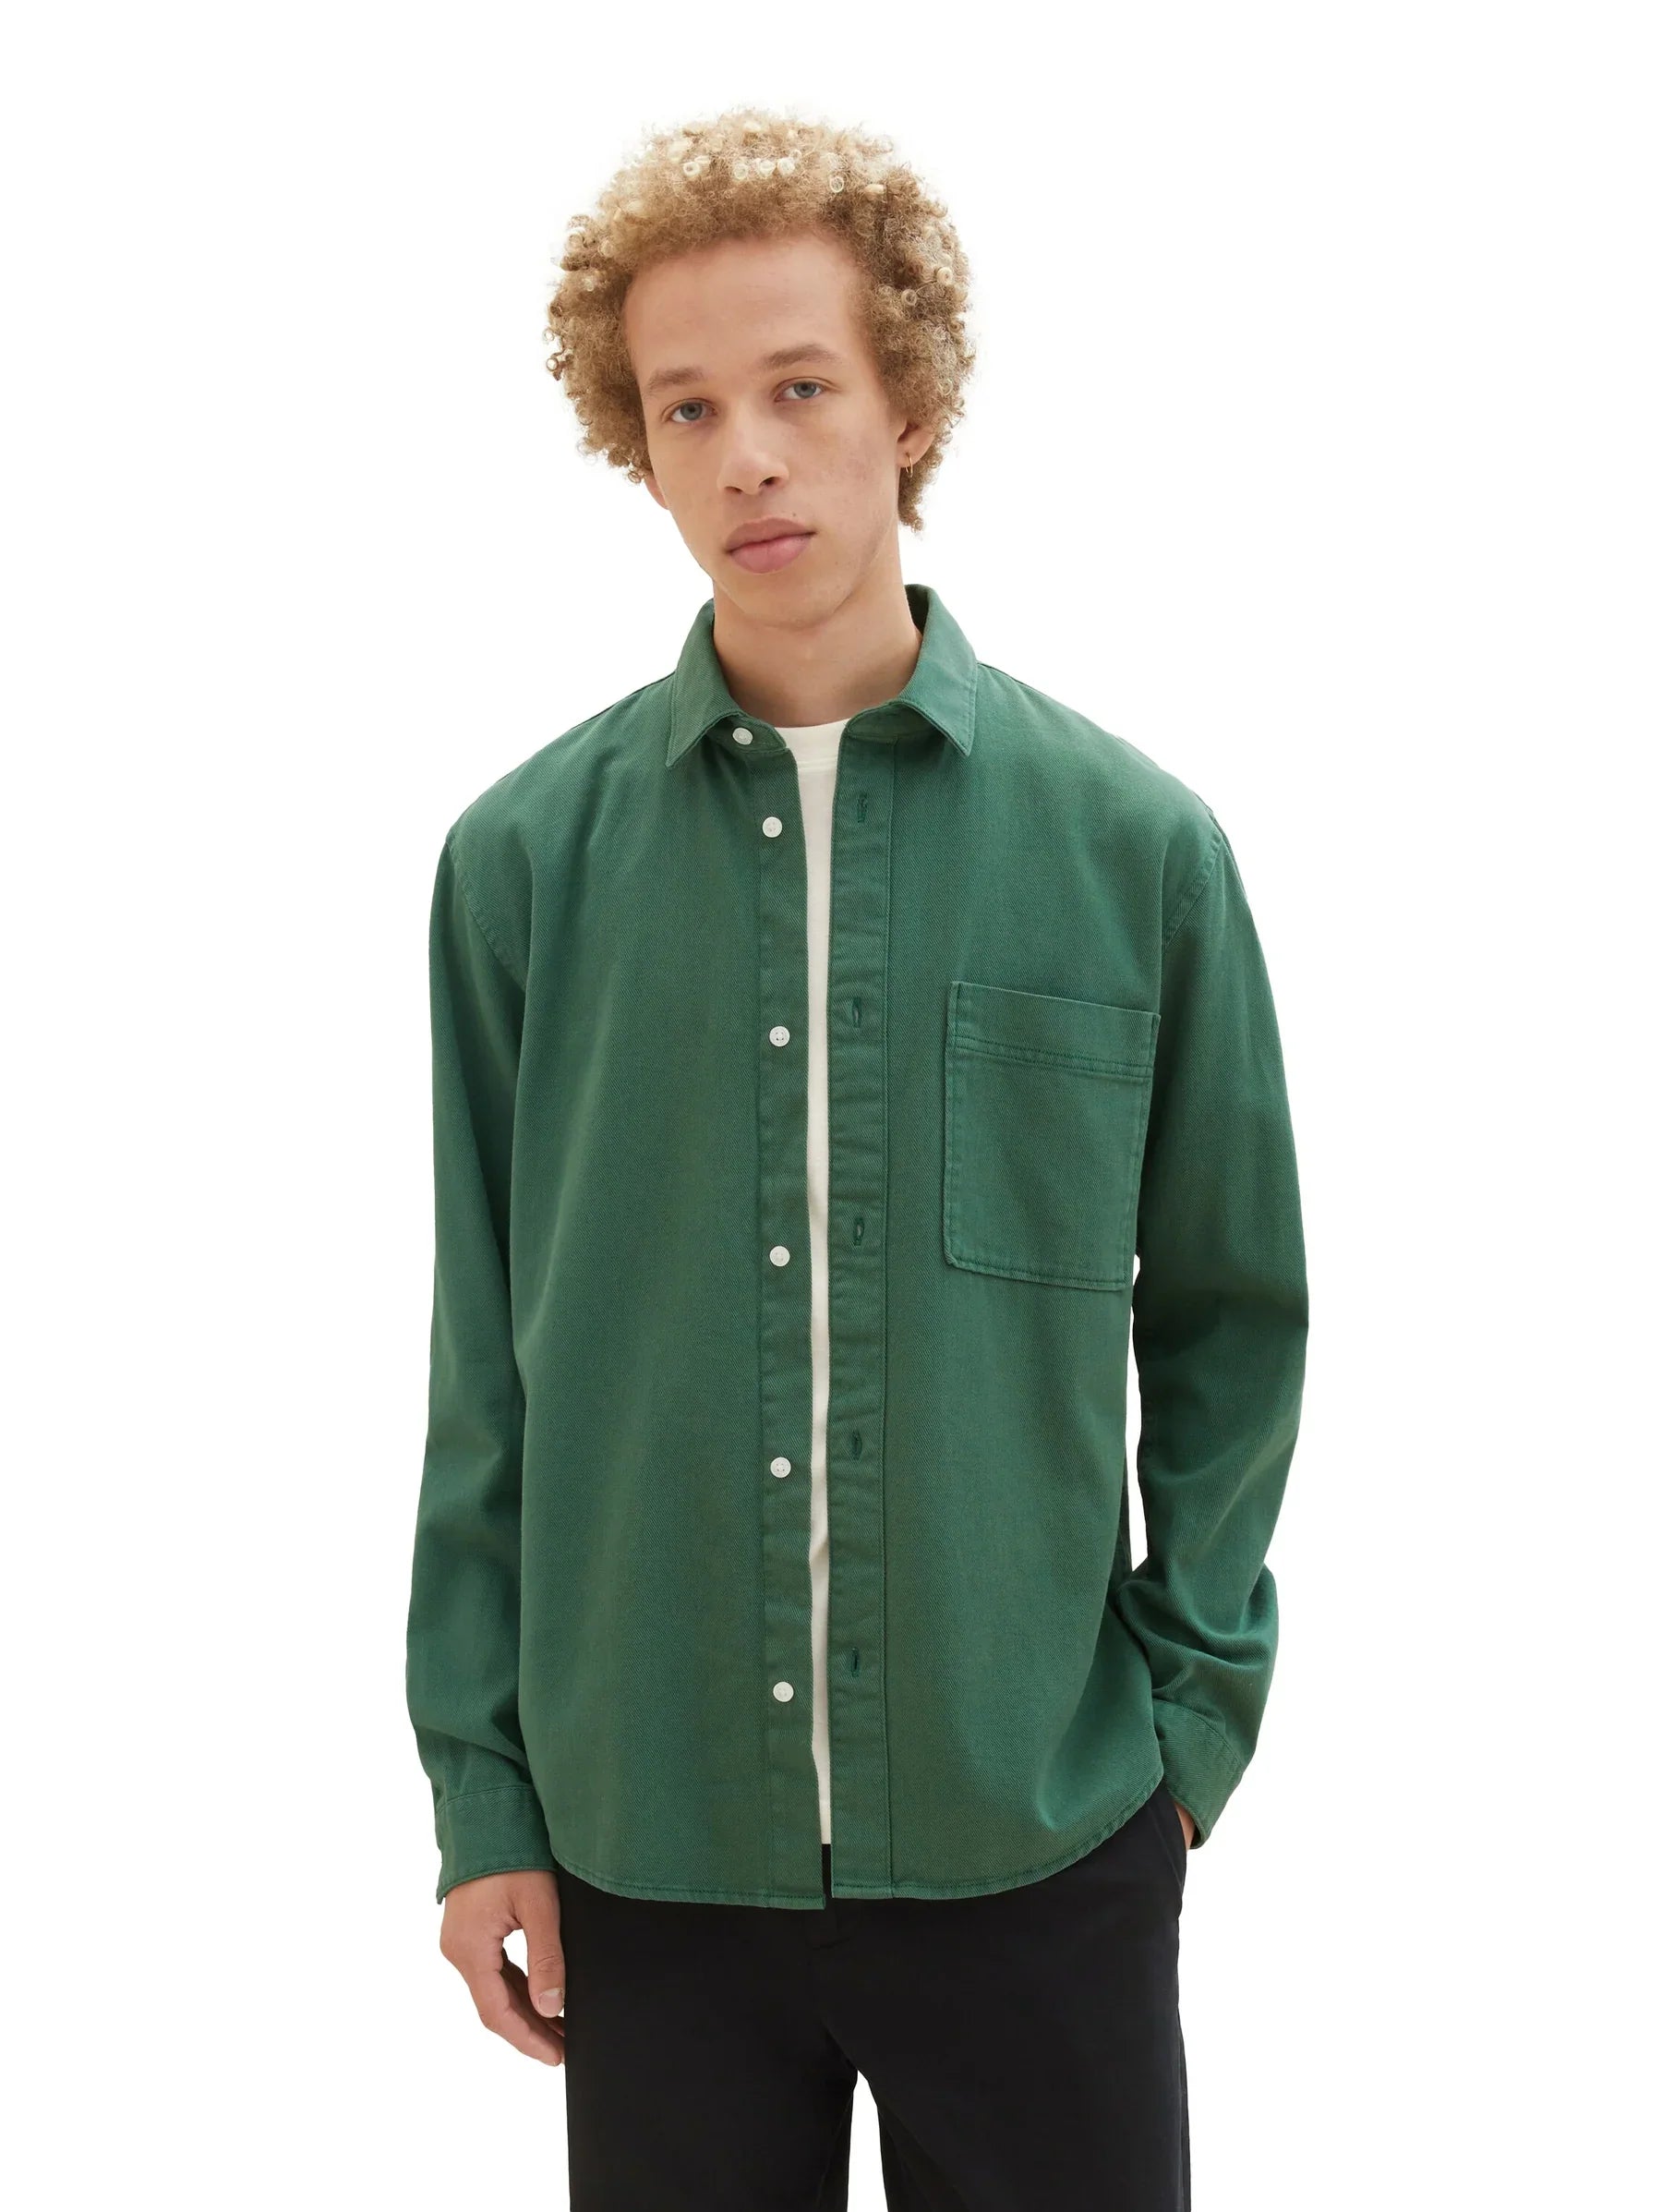 Tom Tailor Green Styled Shirt